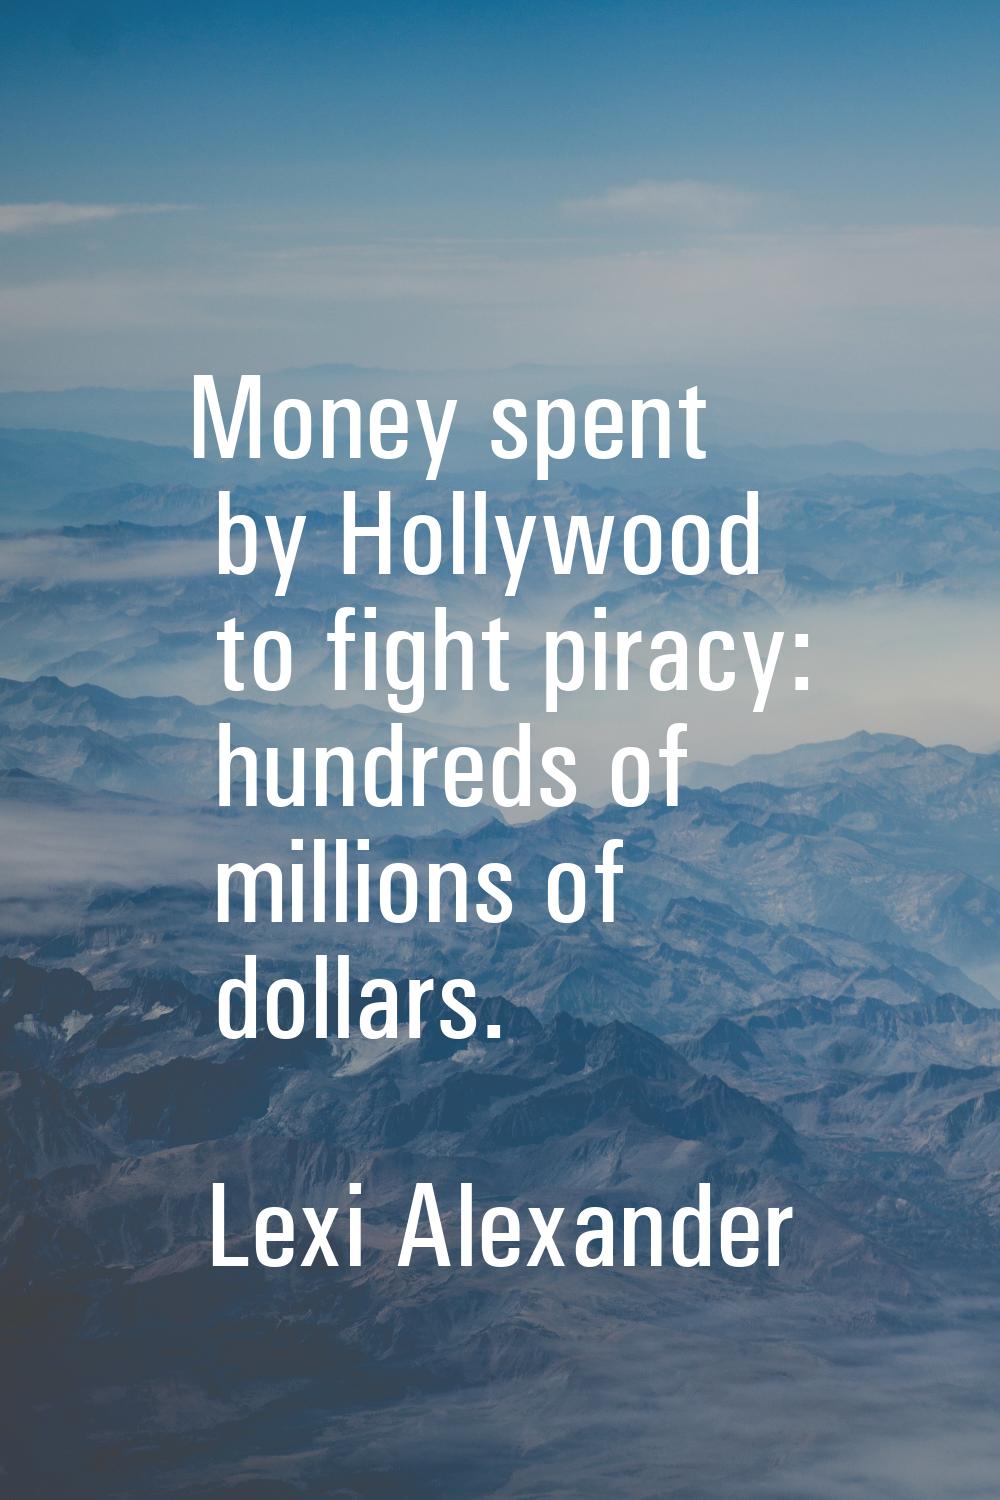 Money spent by Hollywood to fight piracy: hundreds of millions of dollars.